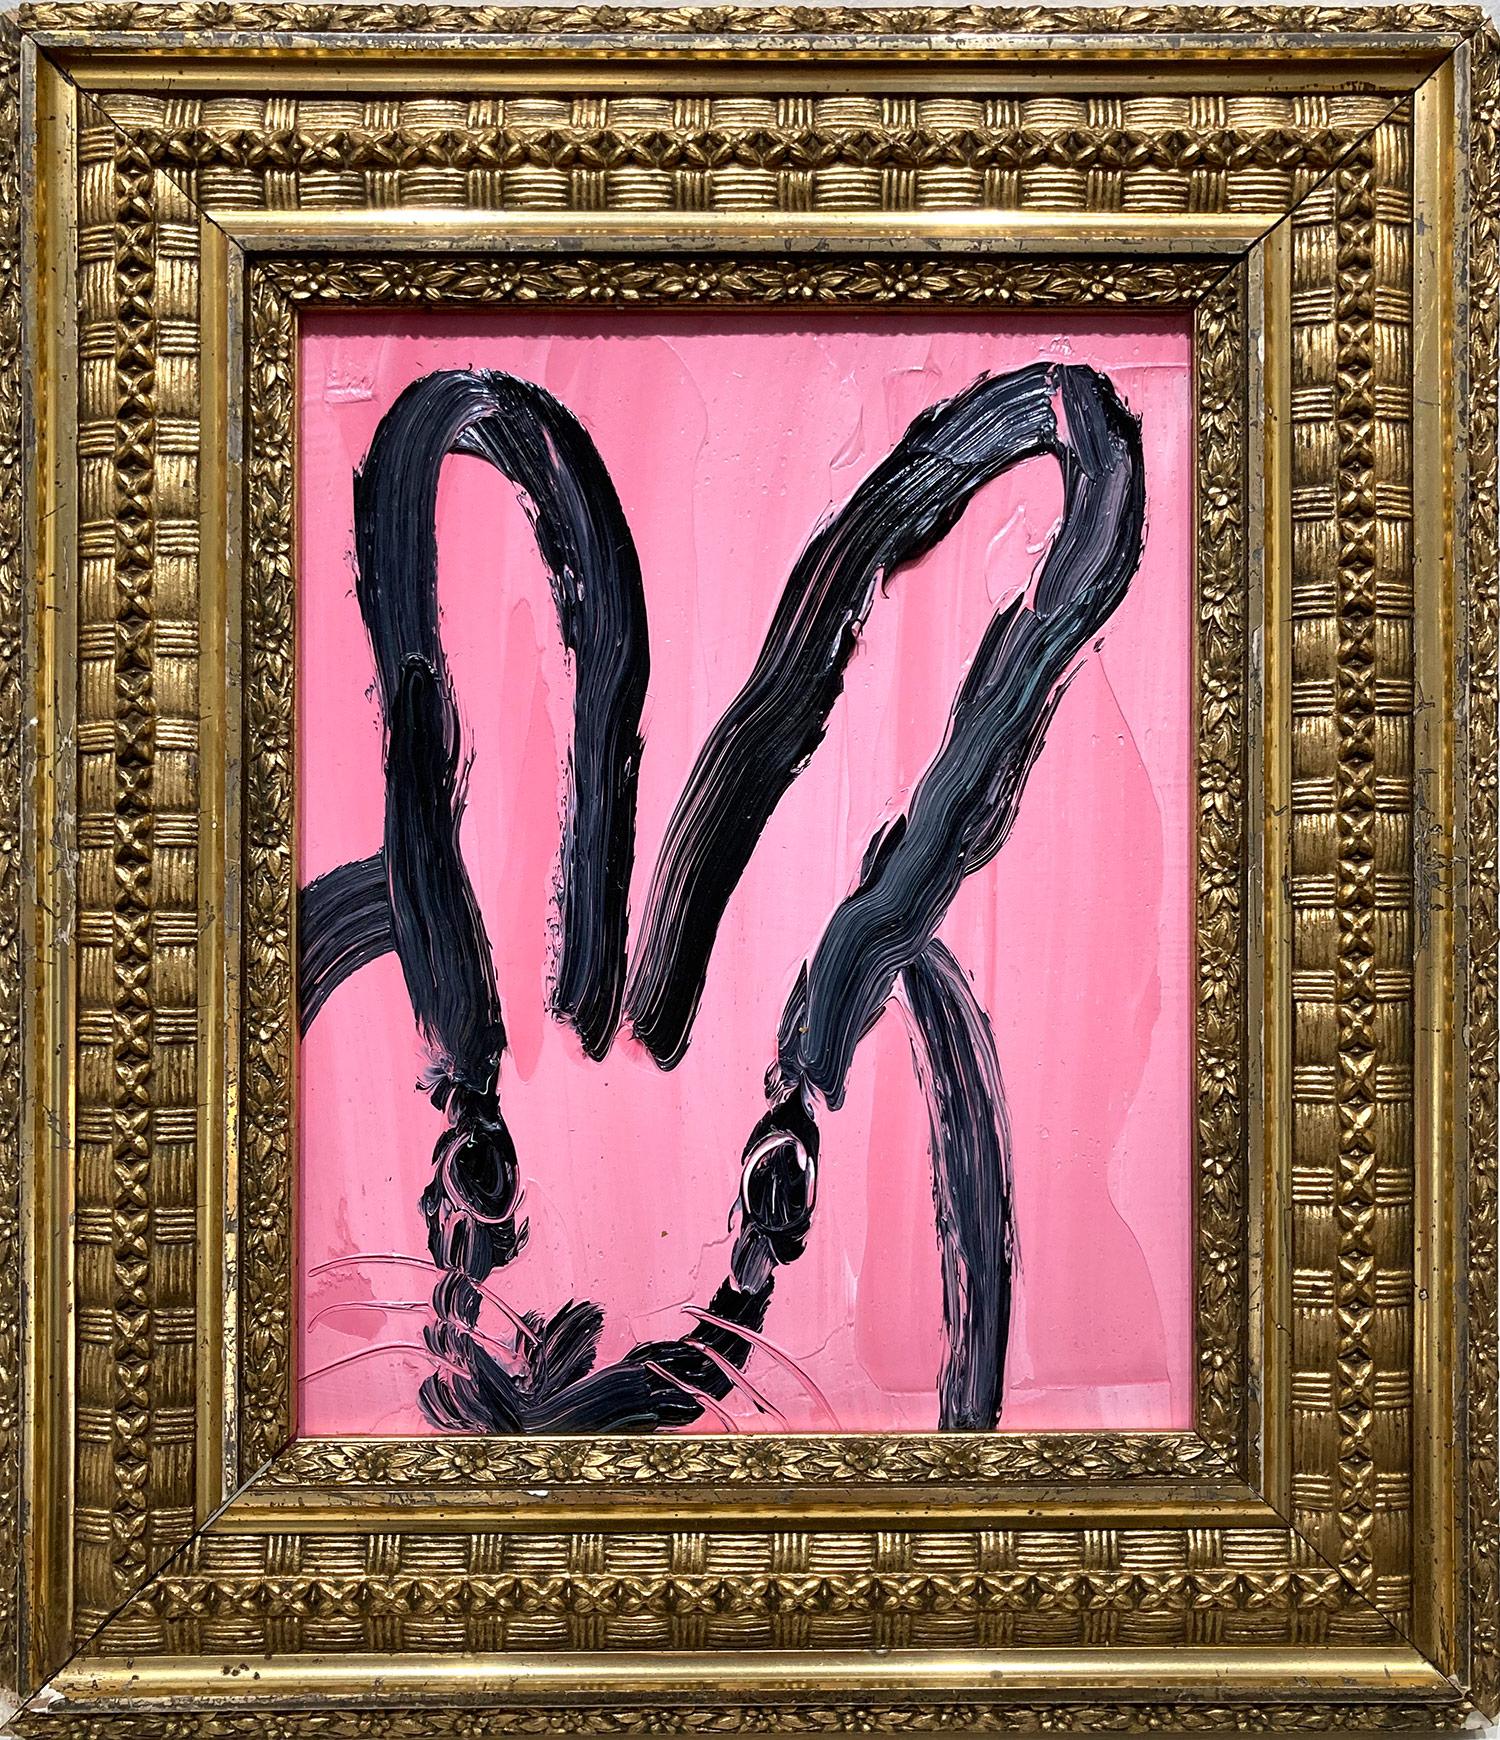 "Pink" Black Bunny on Light Pink Background Oil Painting on Wood Panel